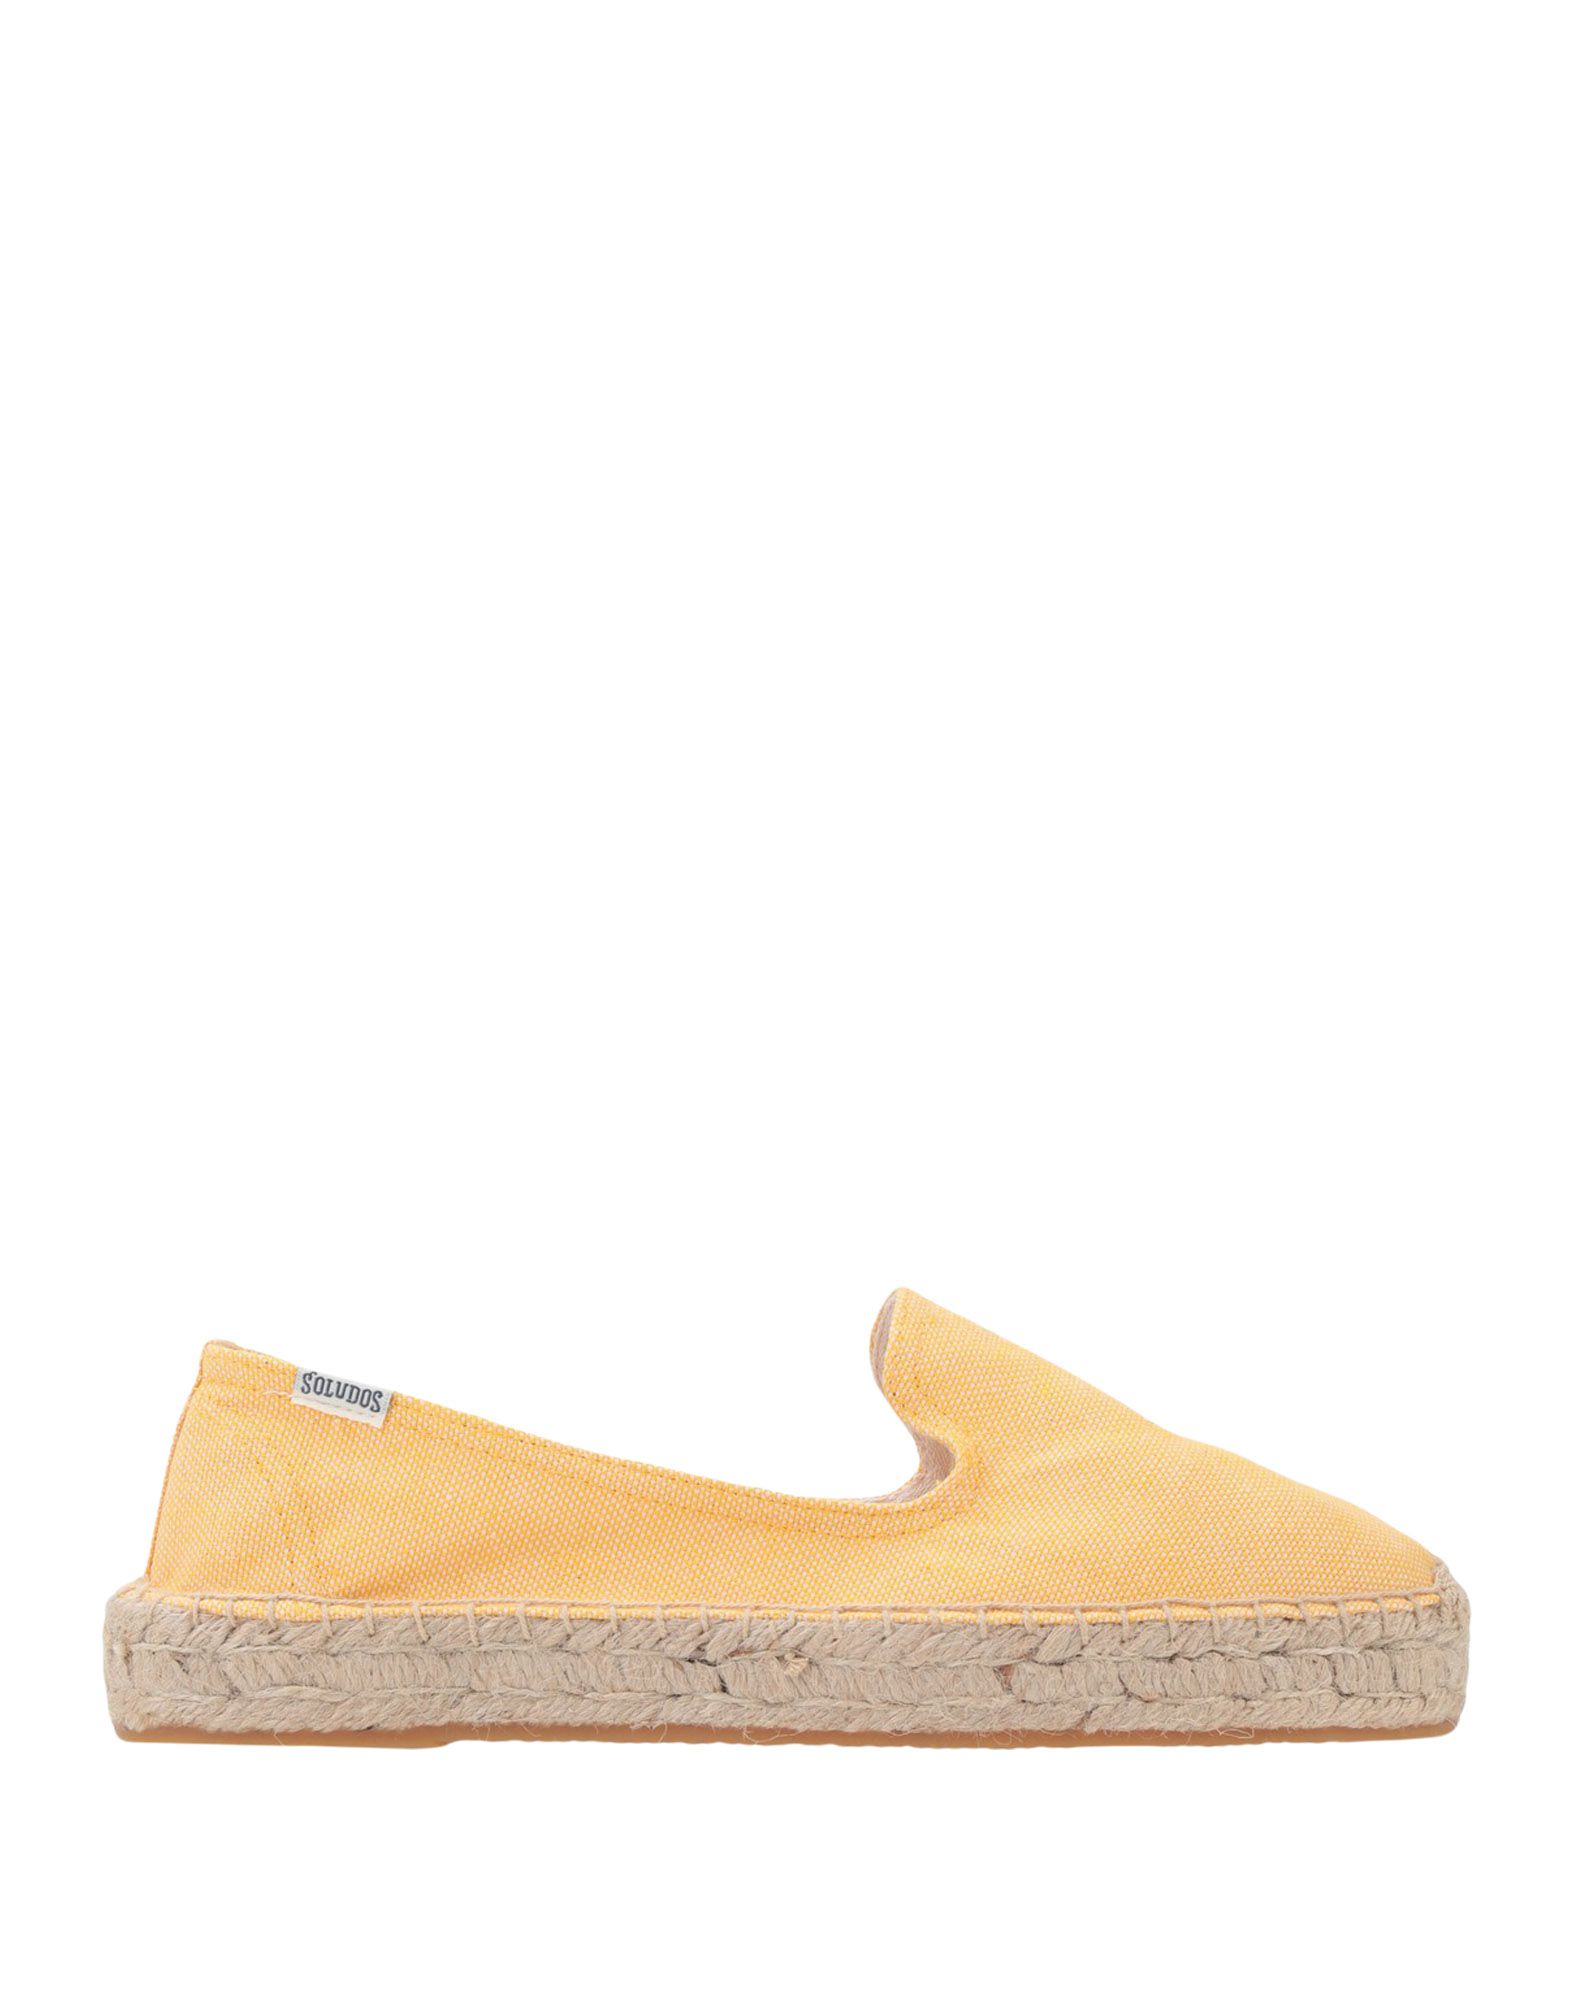 Soludos Espadrilles In Yellow